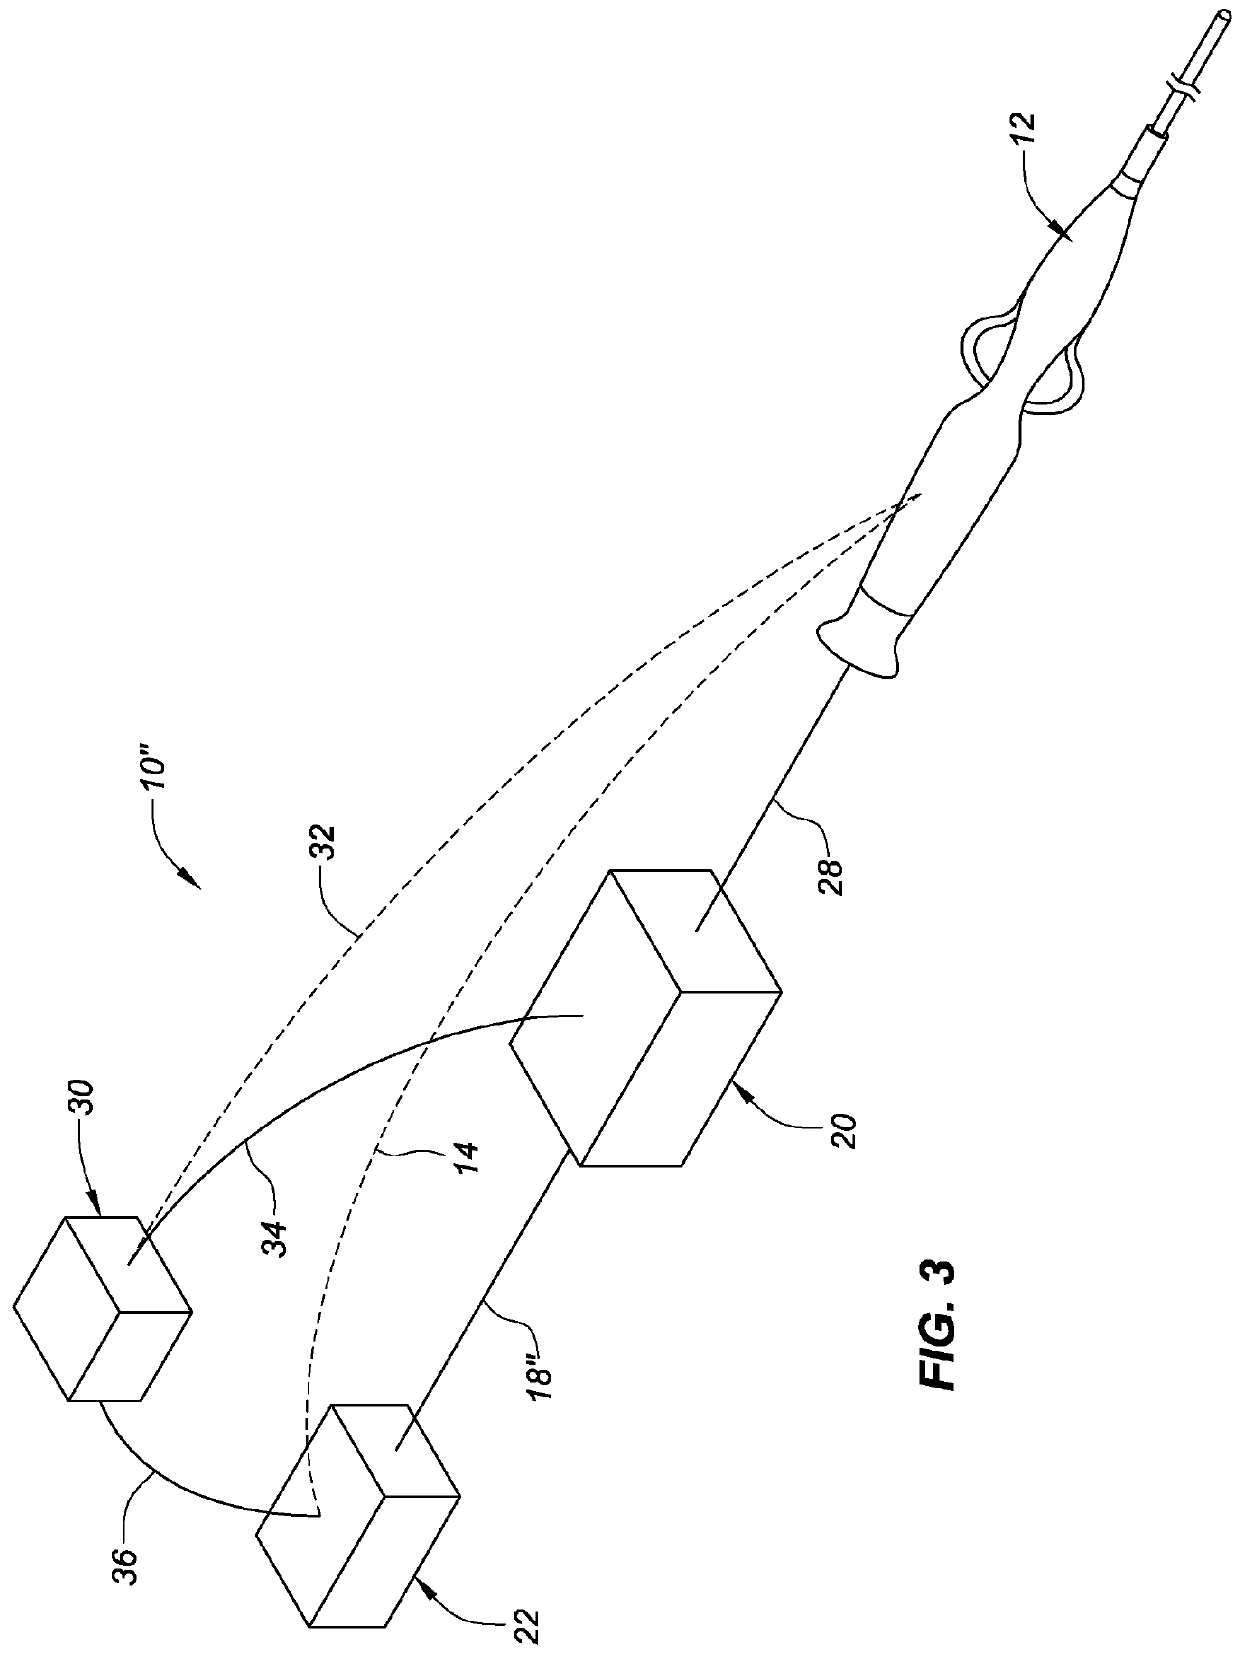 Ablation catheter tip with flexible electronic circuitry